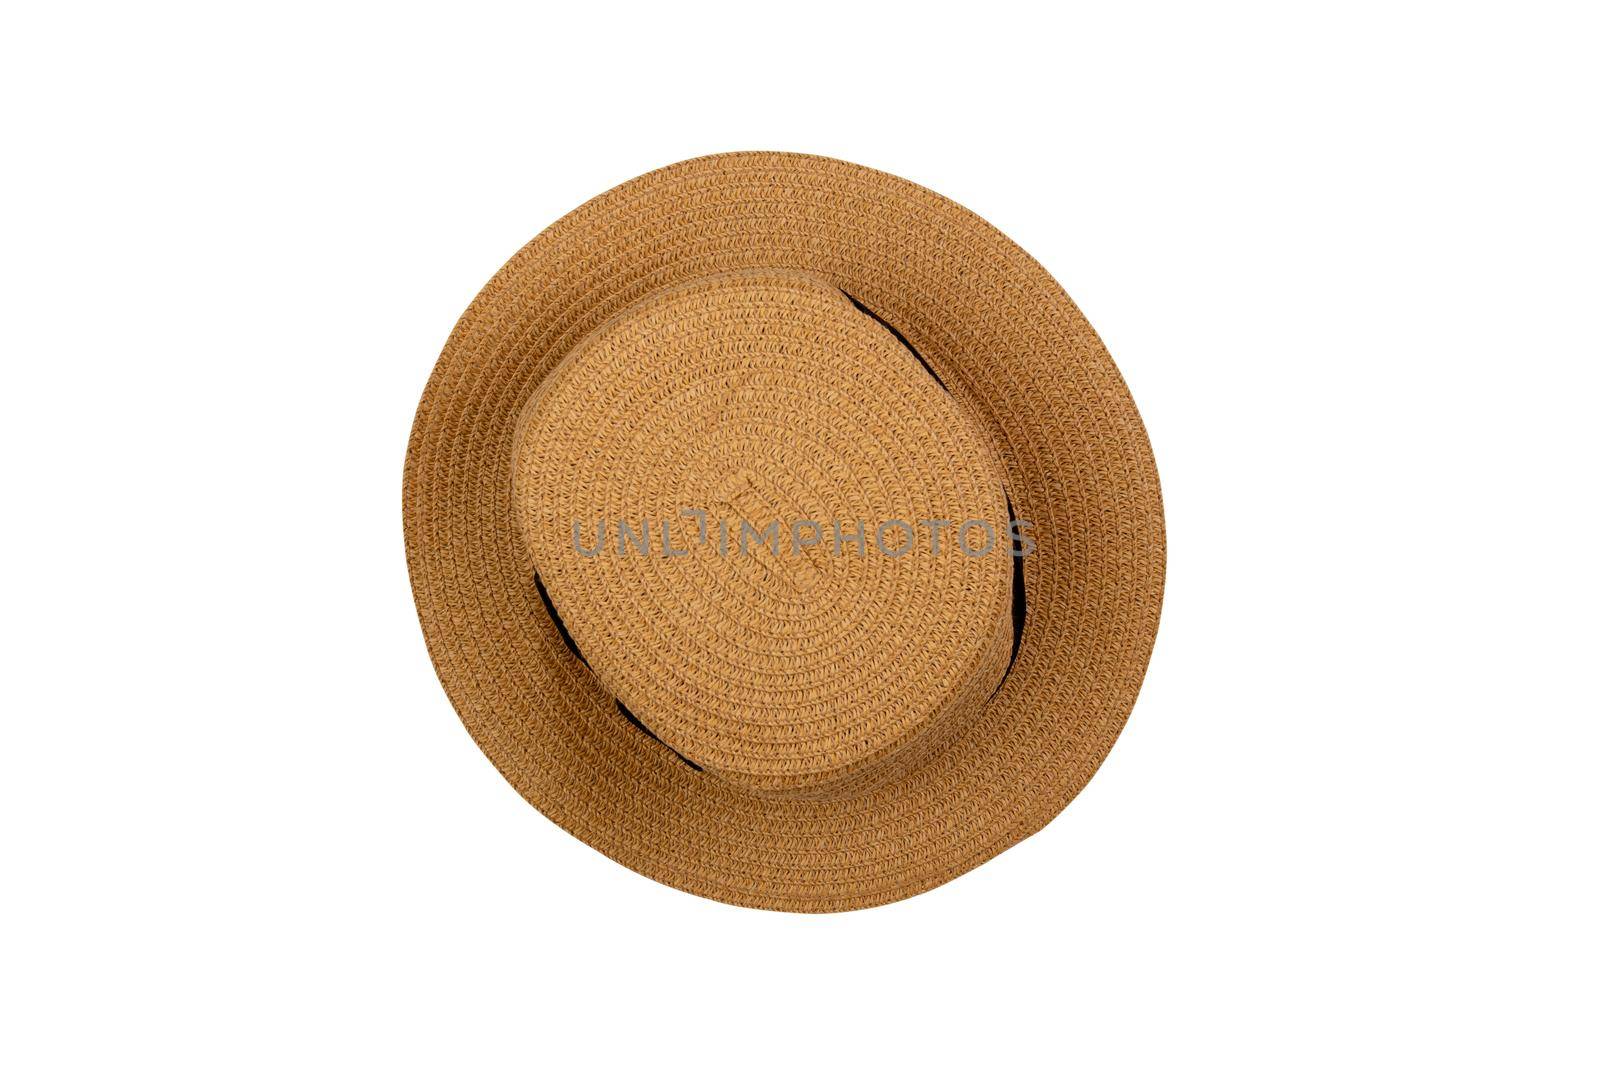 Panama hat with summer top view isolated on white background.